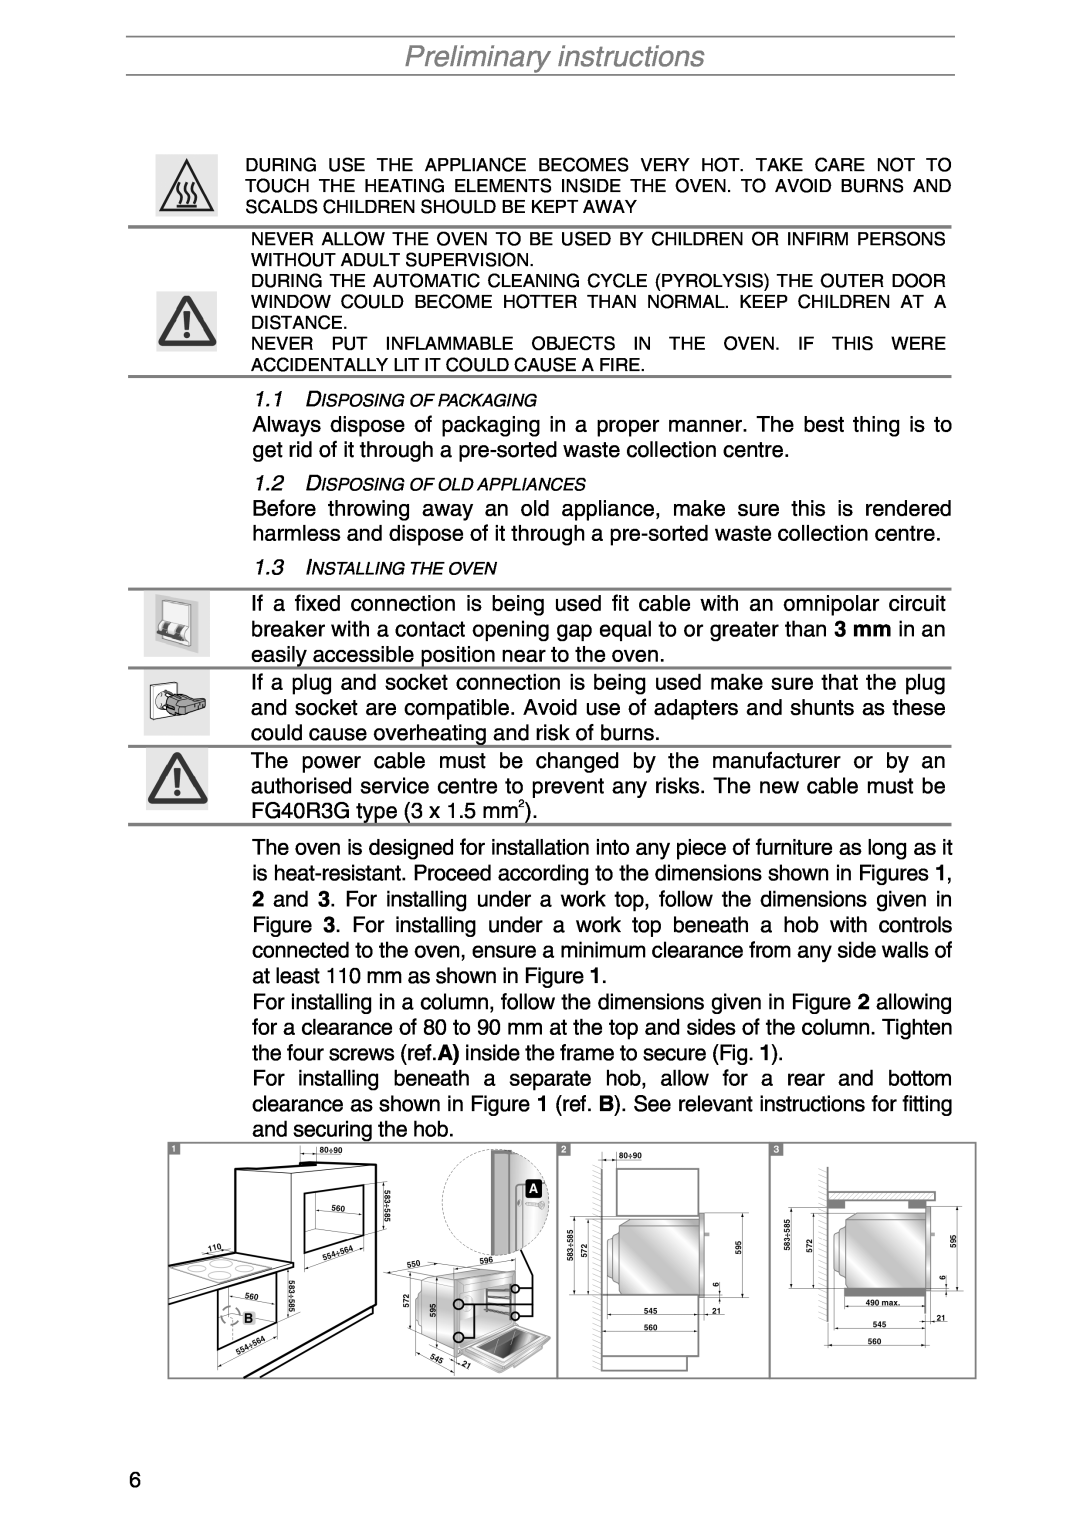 Smeg SA1010X-5 manual Preliminary instructions, Disposing Of Packaging, Disposing Of Old Appliances, Installing The Oven 